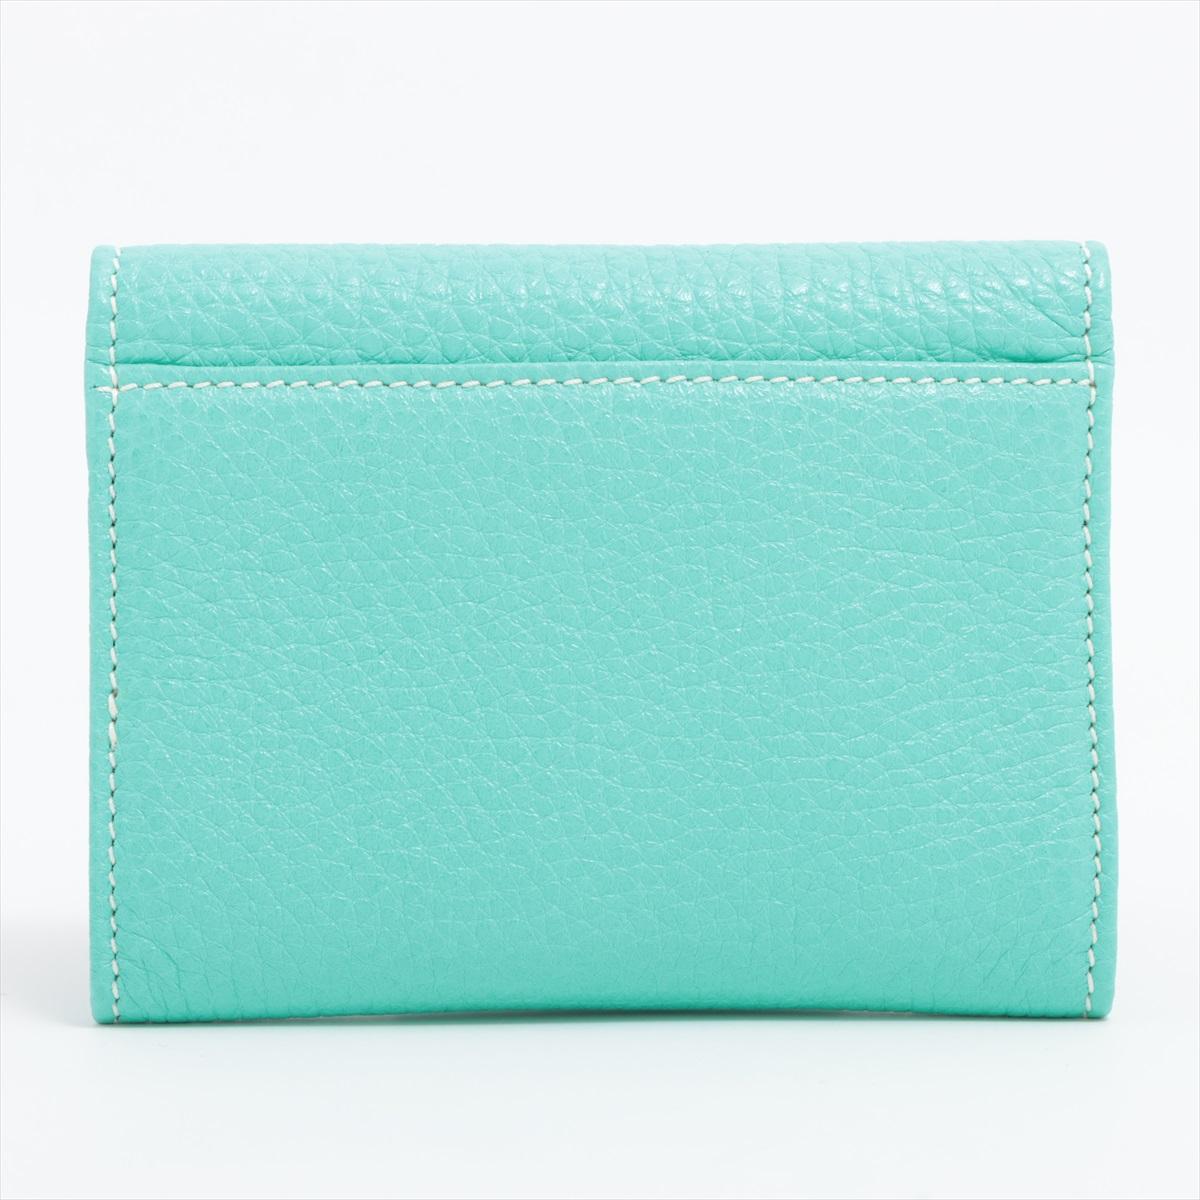 Tiffany & Co Twist-lock Leather Coin Purse Blue In Good Condition For Sale In Indianapolis, IN